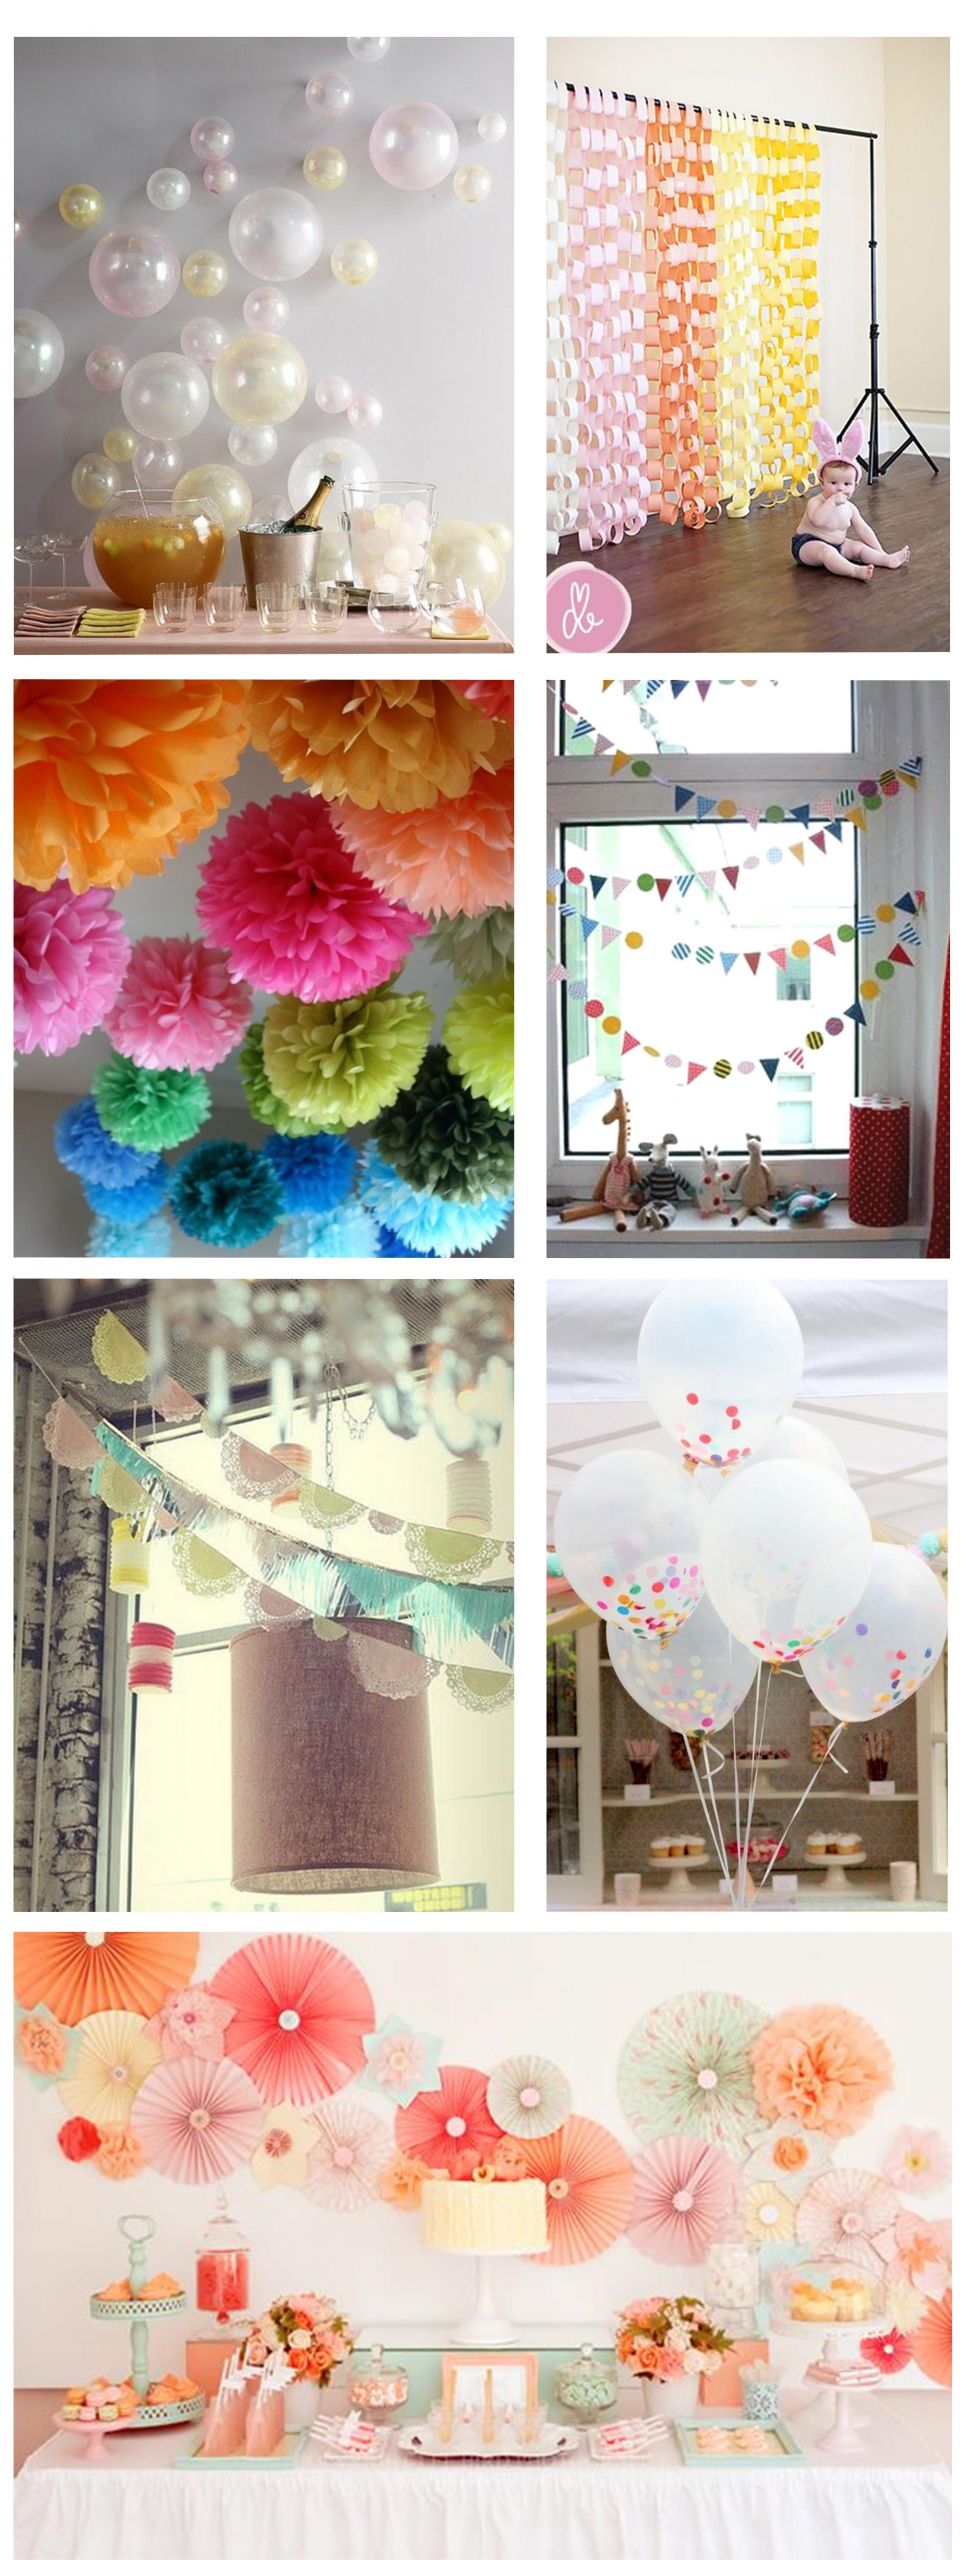 DIY Birthday Decor
 Ideas for home made party decorations